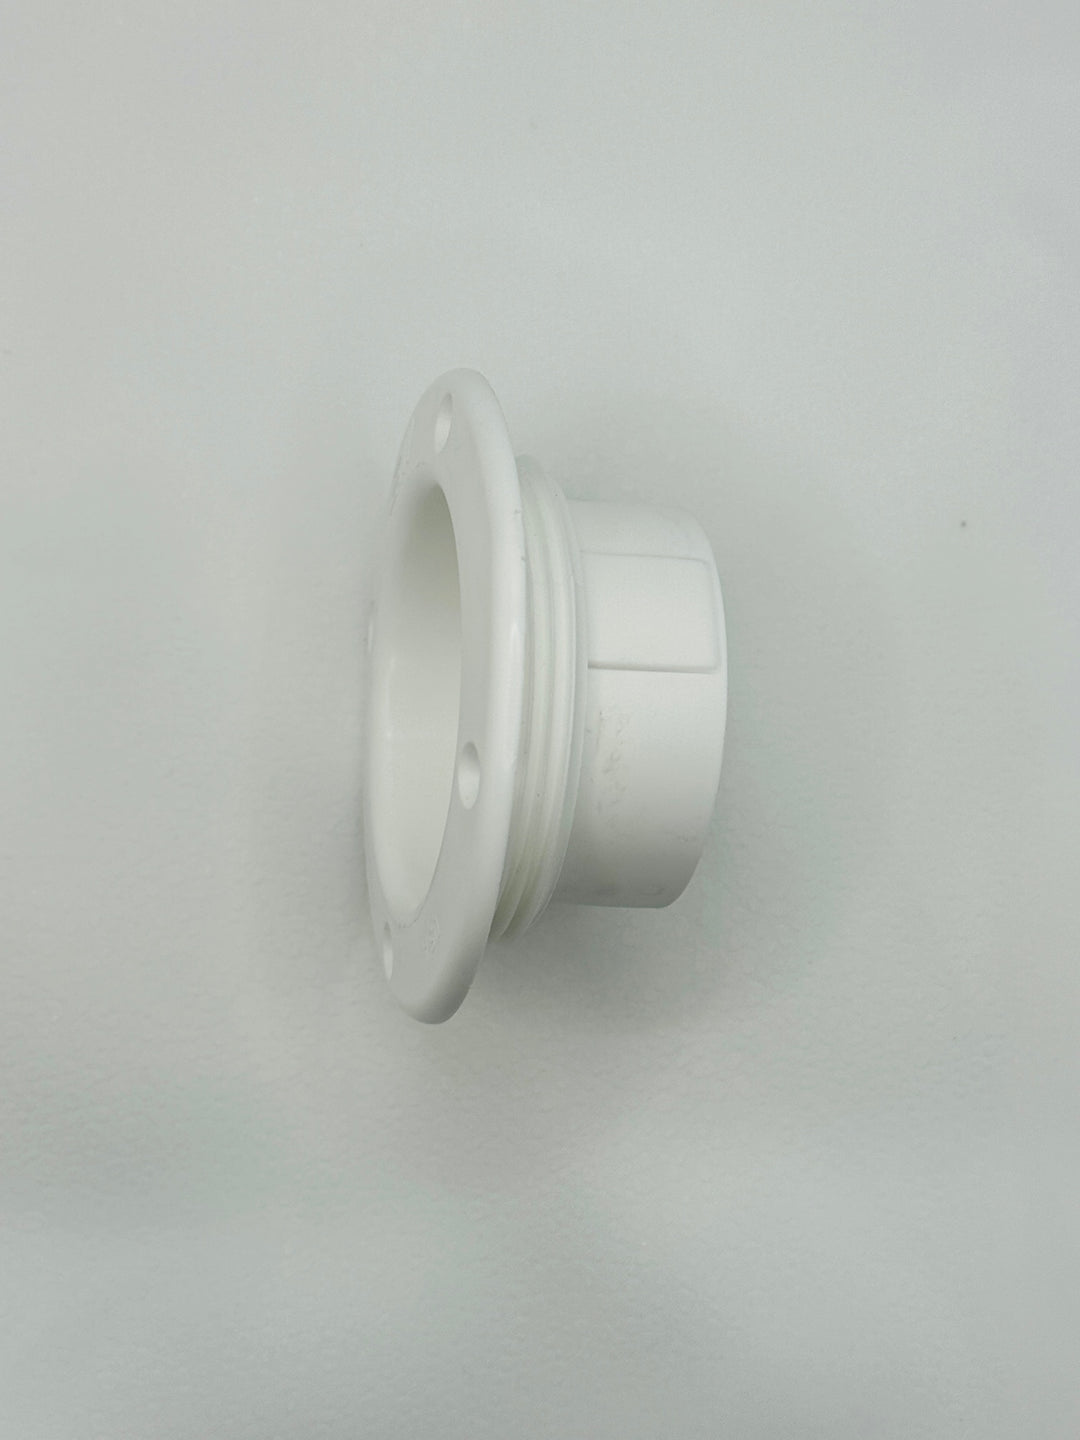 2" ID White Trim Ring with extension